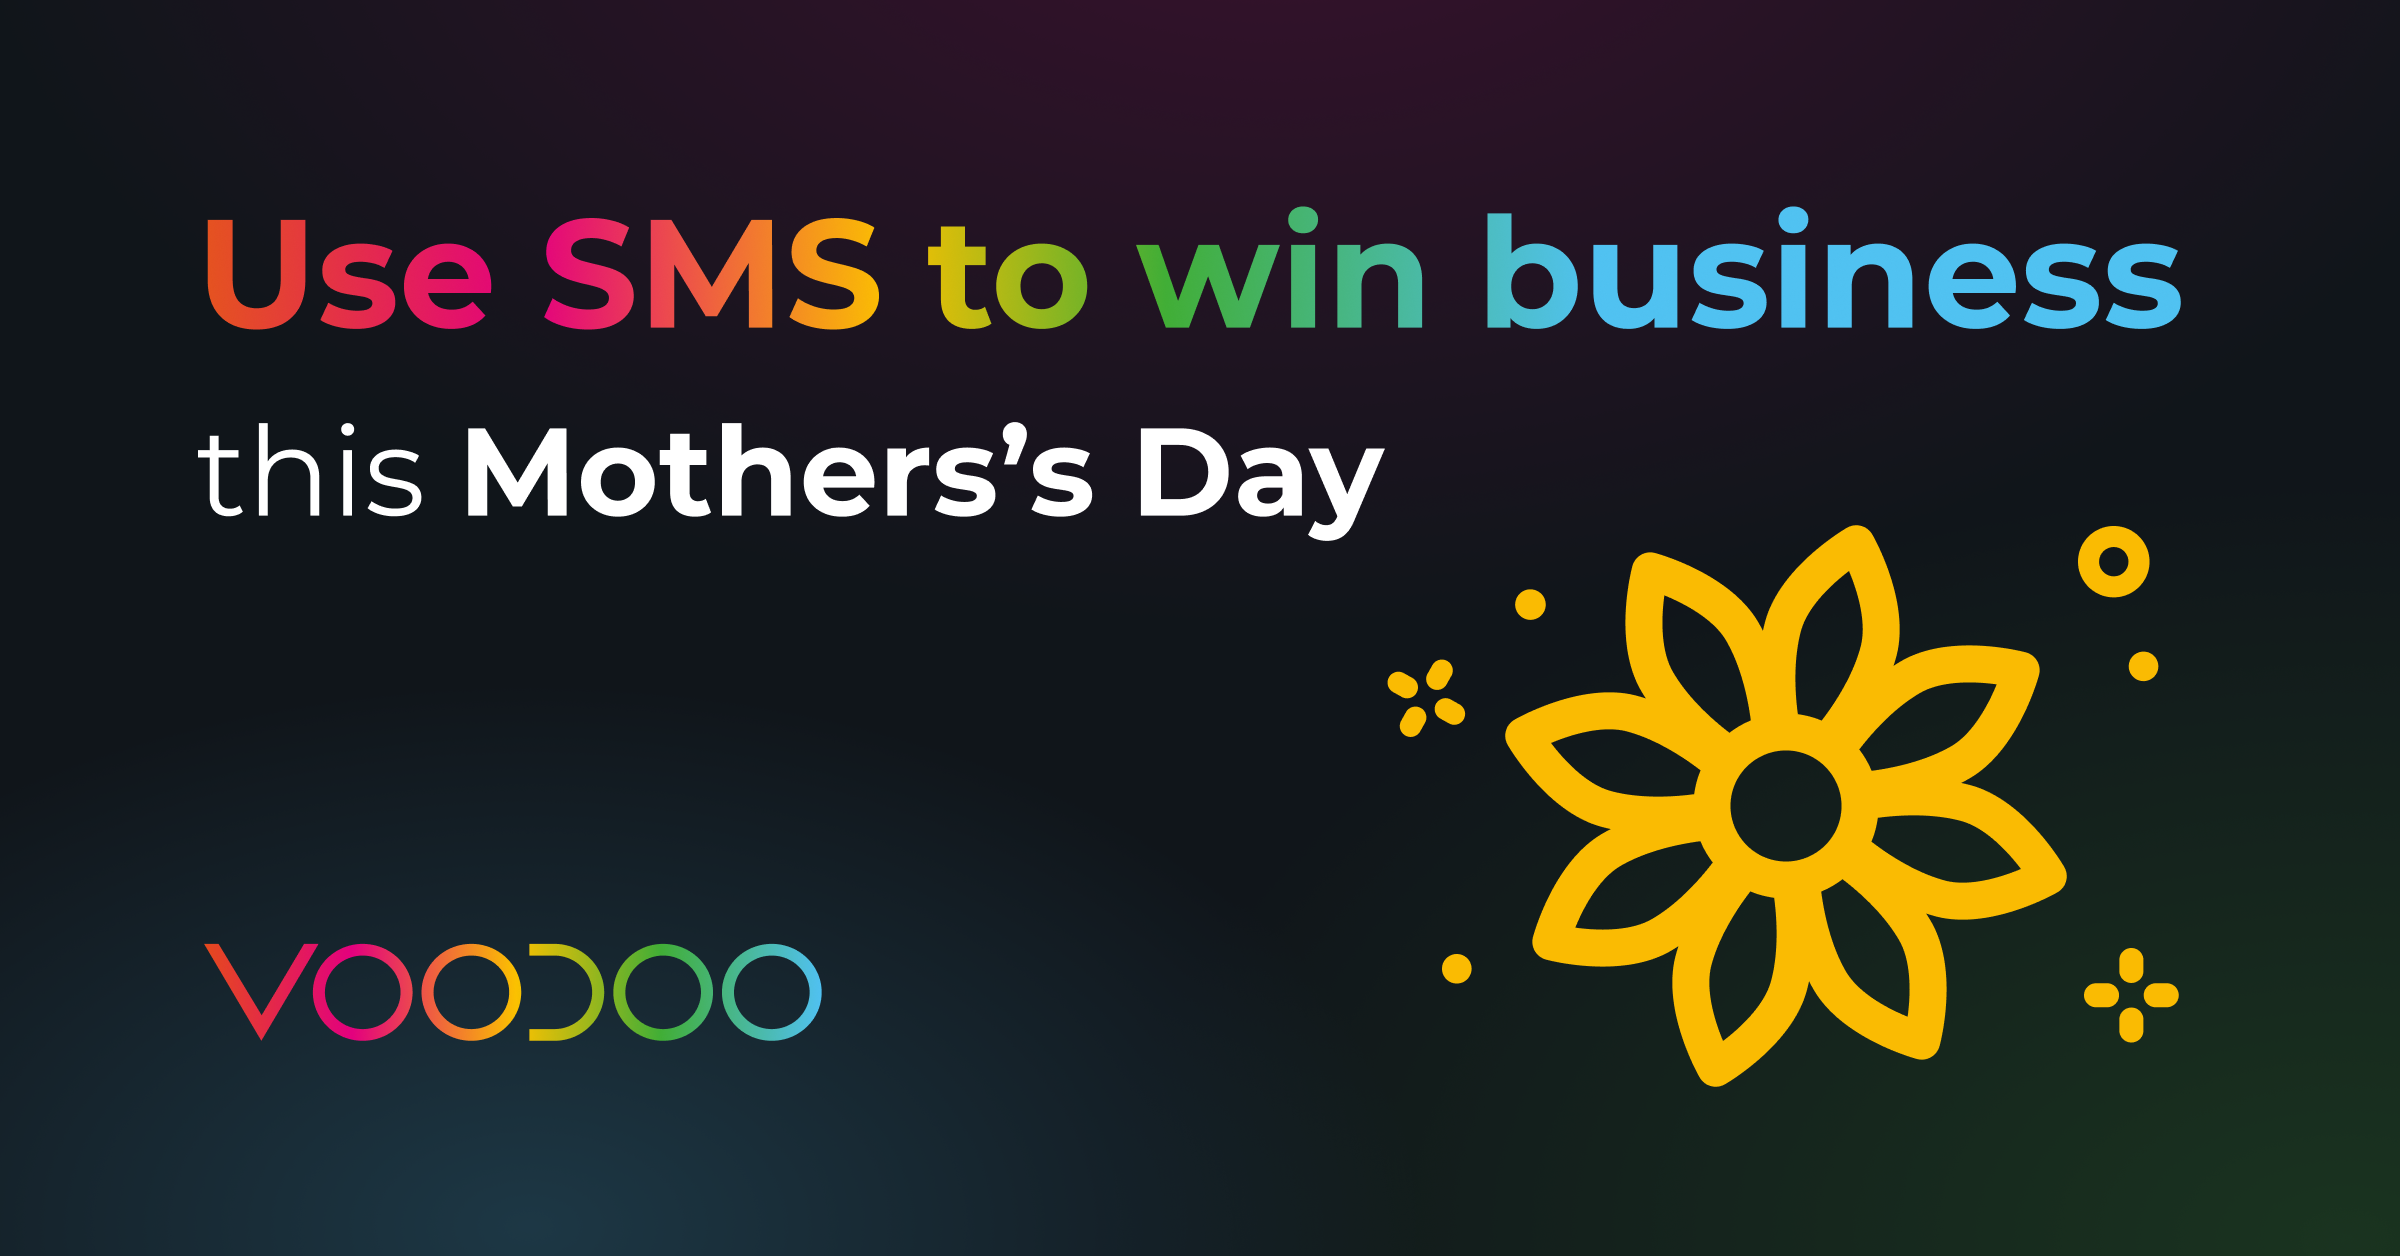 Use SMS to win new business this Mother’s Day